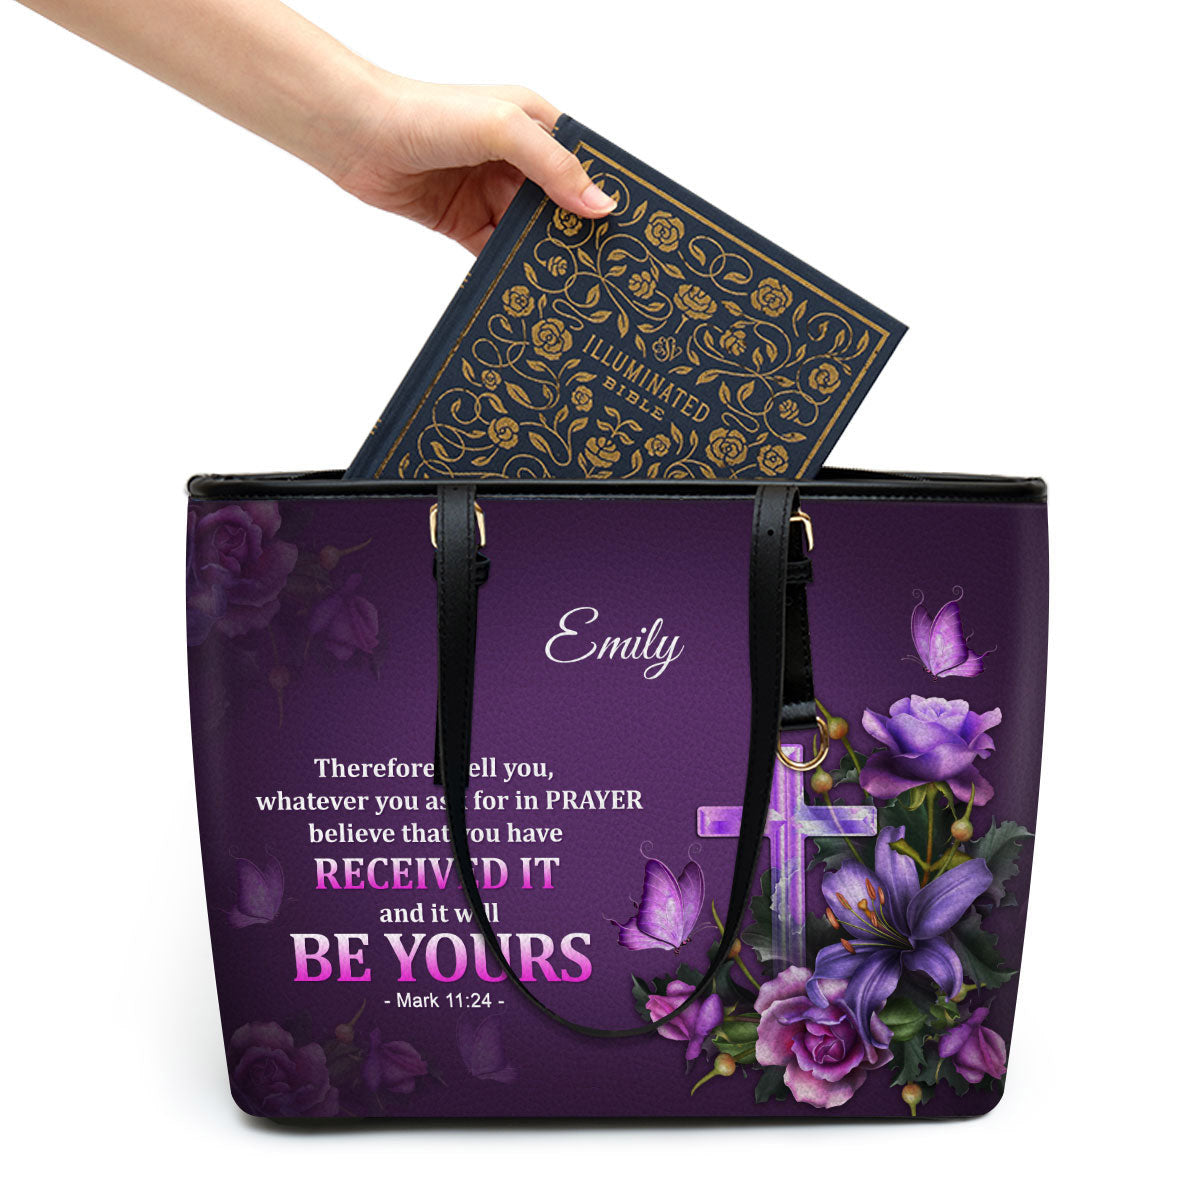 Personalized Large Leather Tote Bag Believe That You Have Received It - Spiritual Gifts For Christian Women